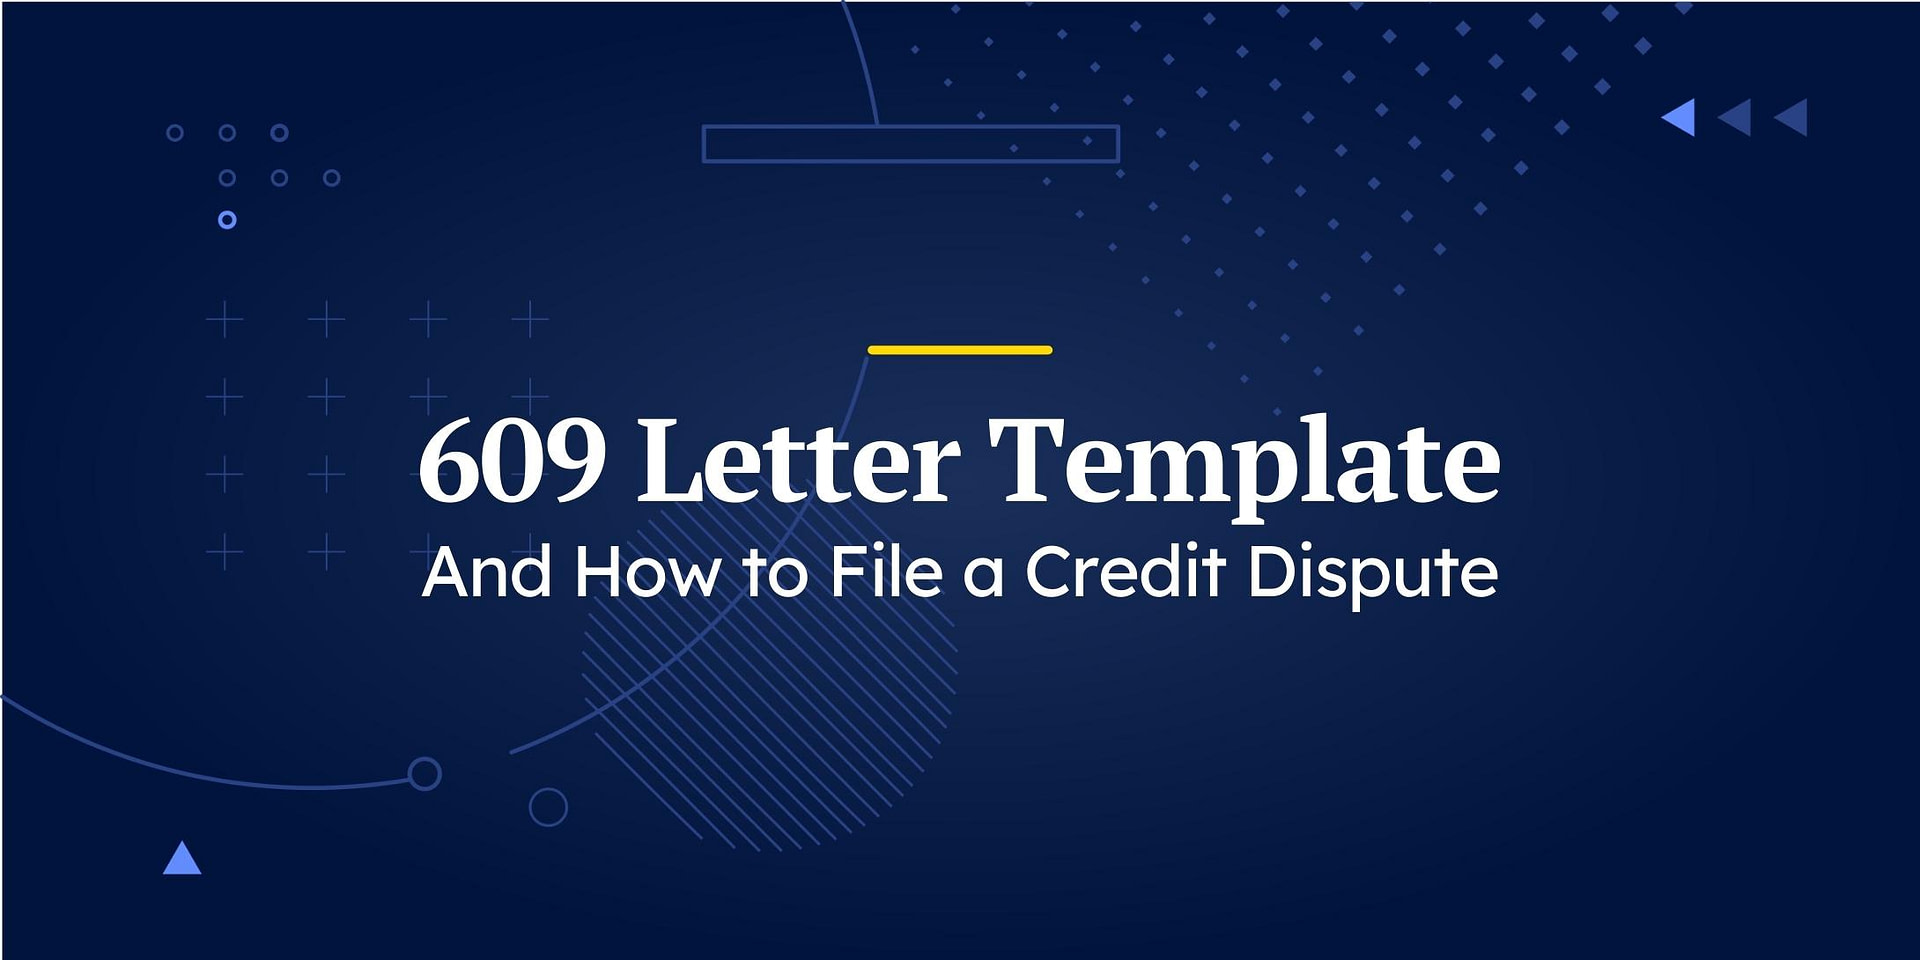 609 Letter Template How to File a Credit Dispute